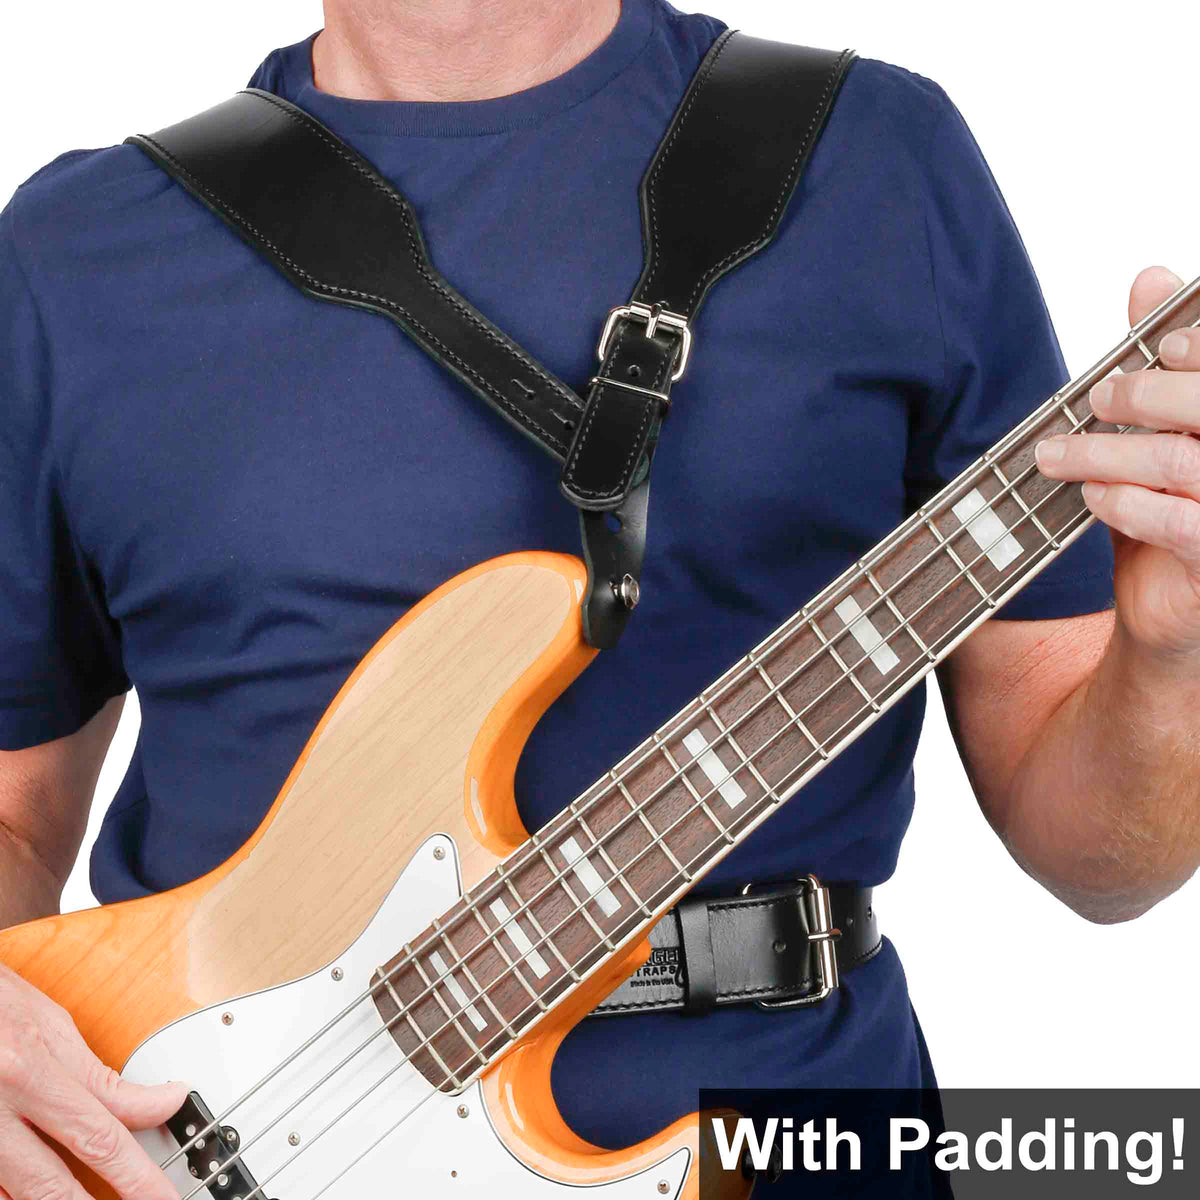 double guitar strap made of leather attached to Fender jazz bass